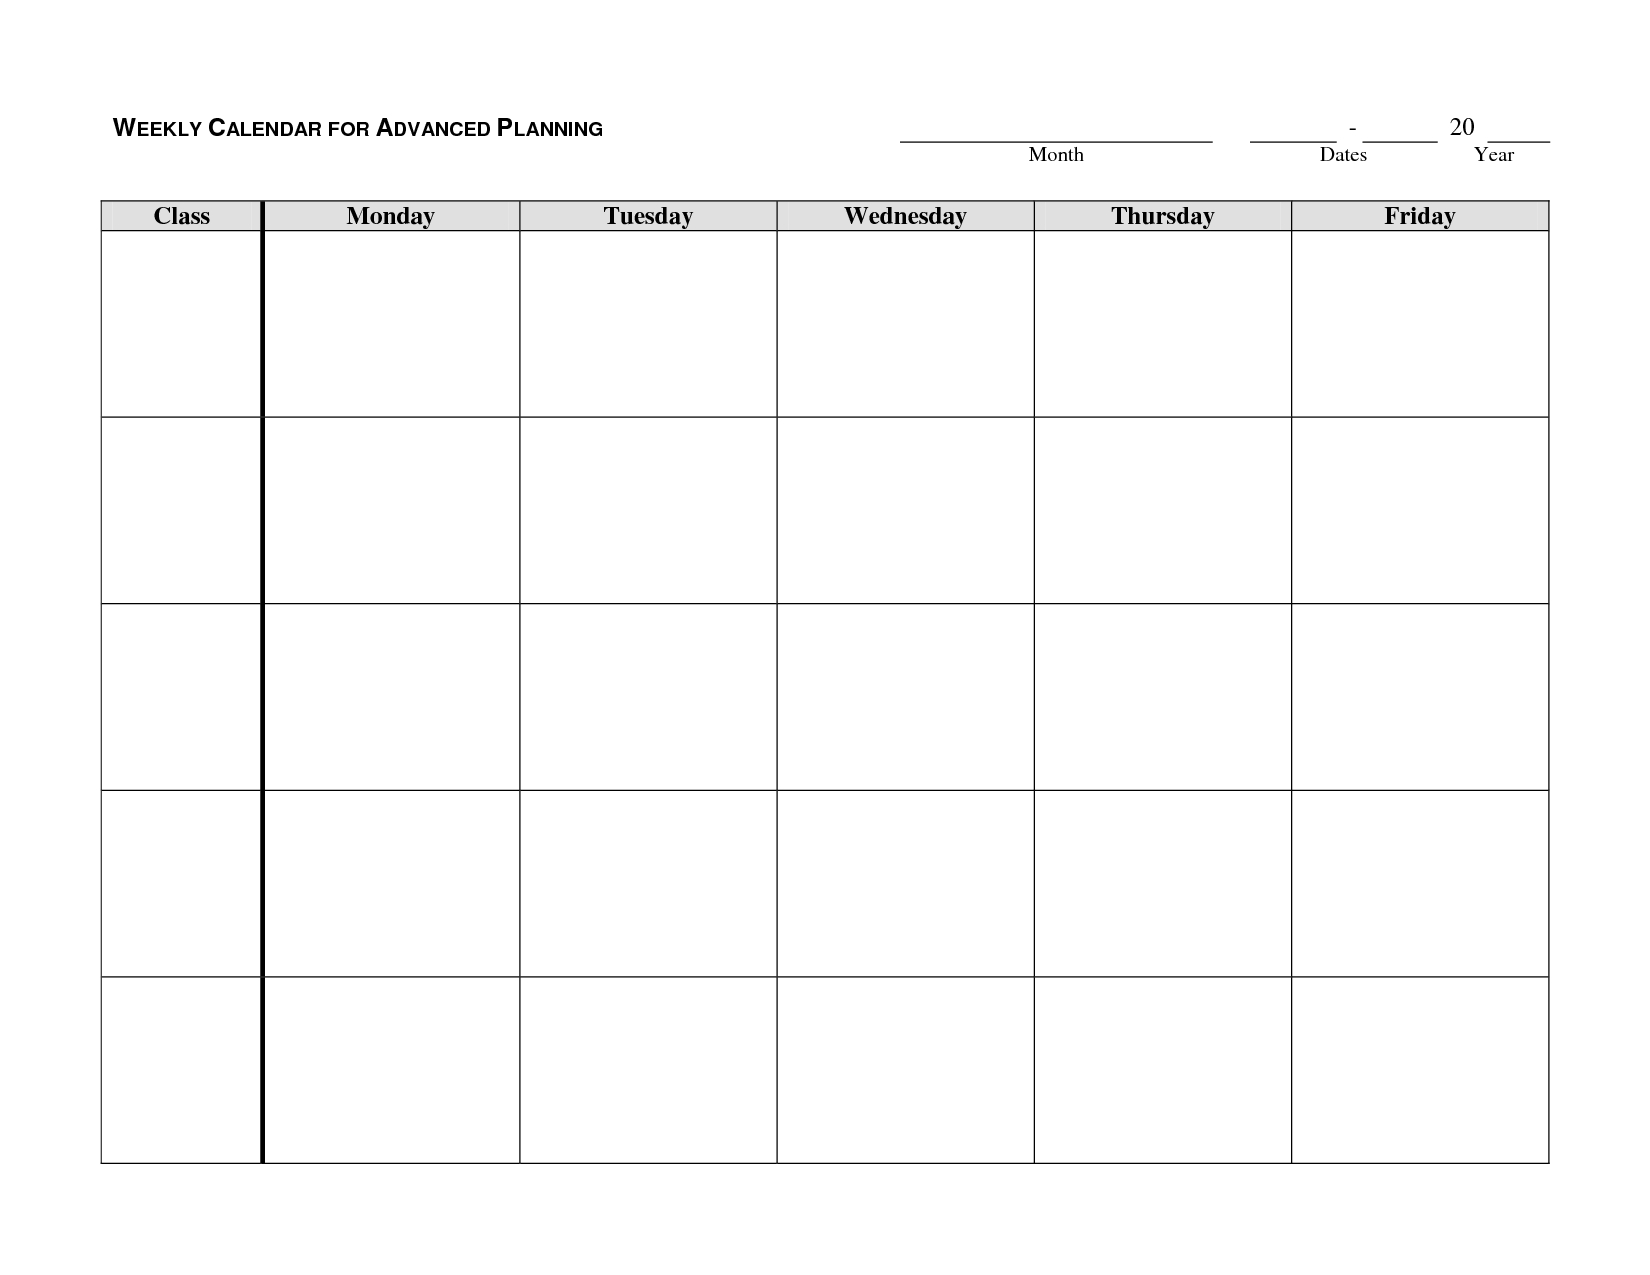 Weekly Calendar Template - Google Search | Monthly Calendar-Blank Monday Through Friday Schedule